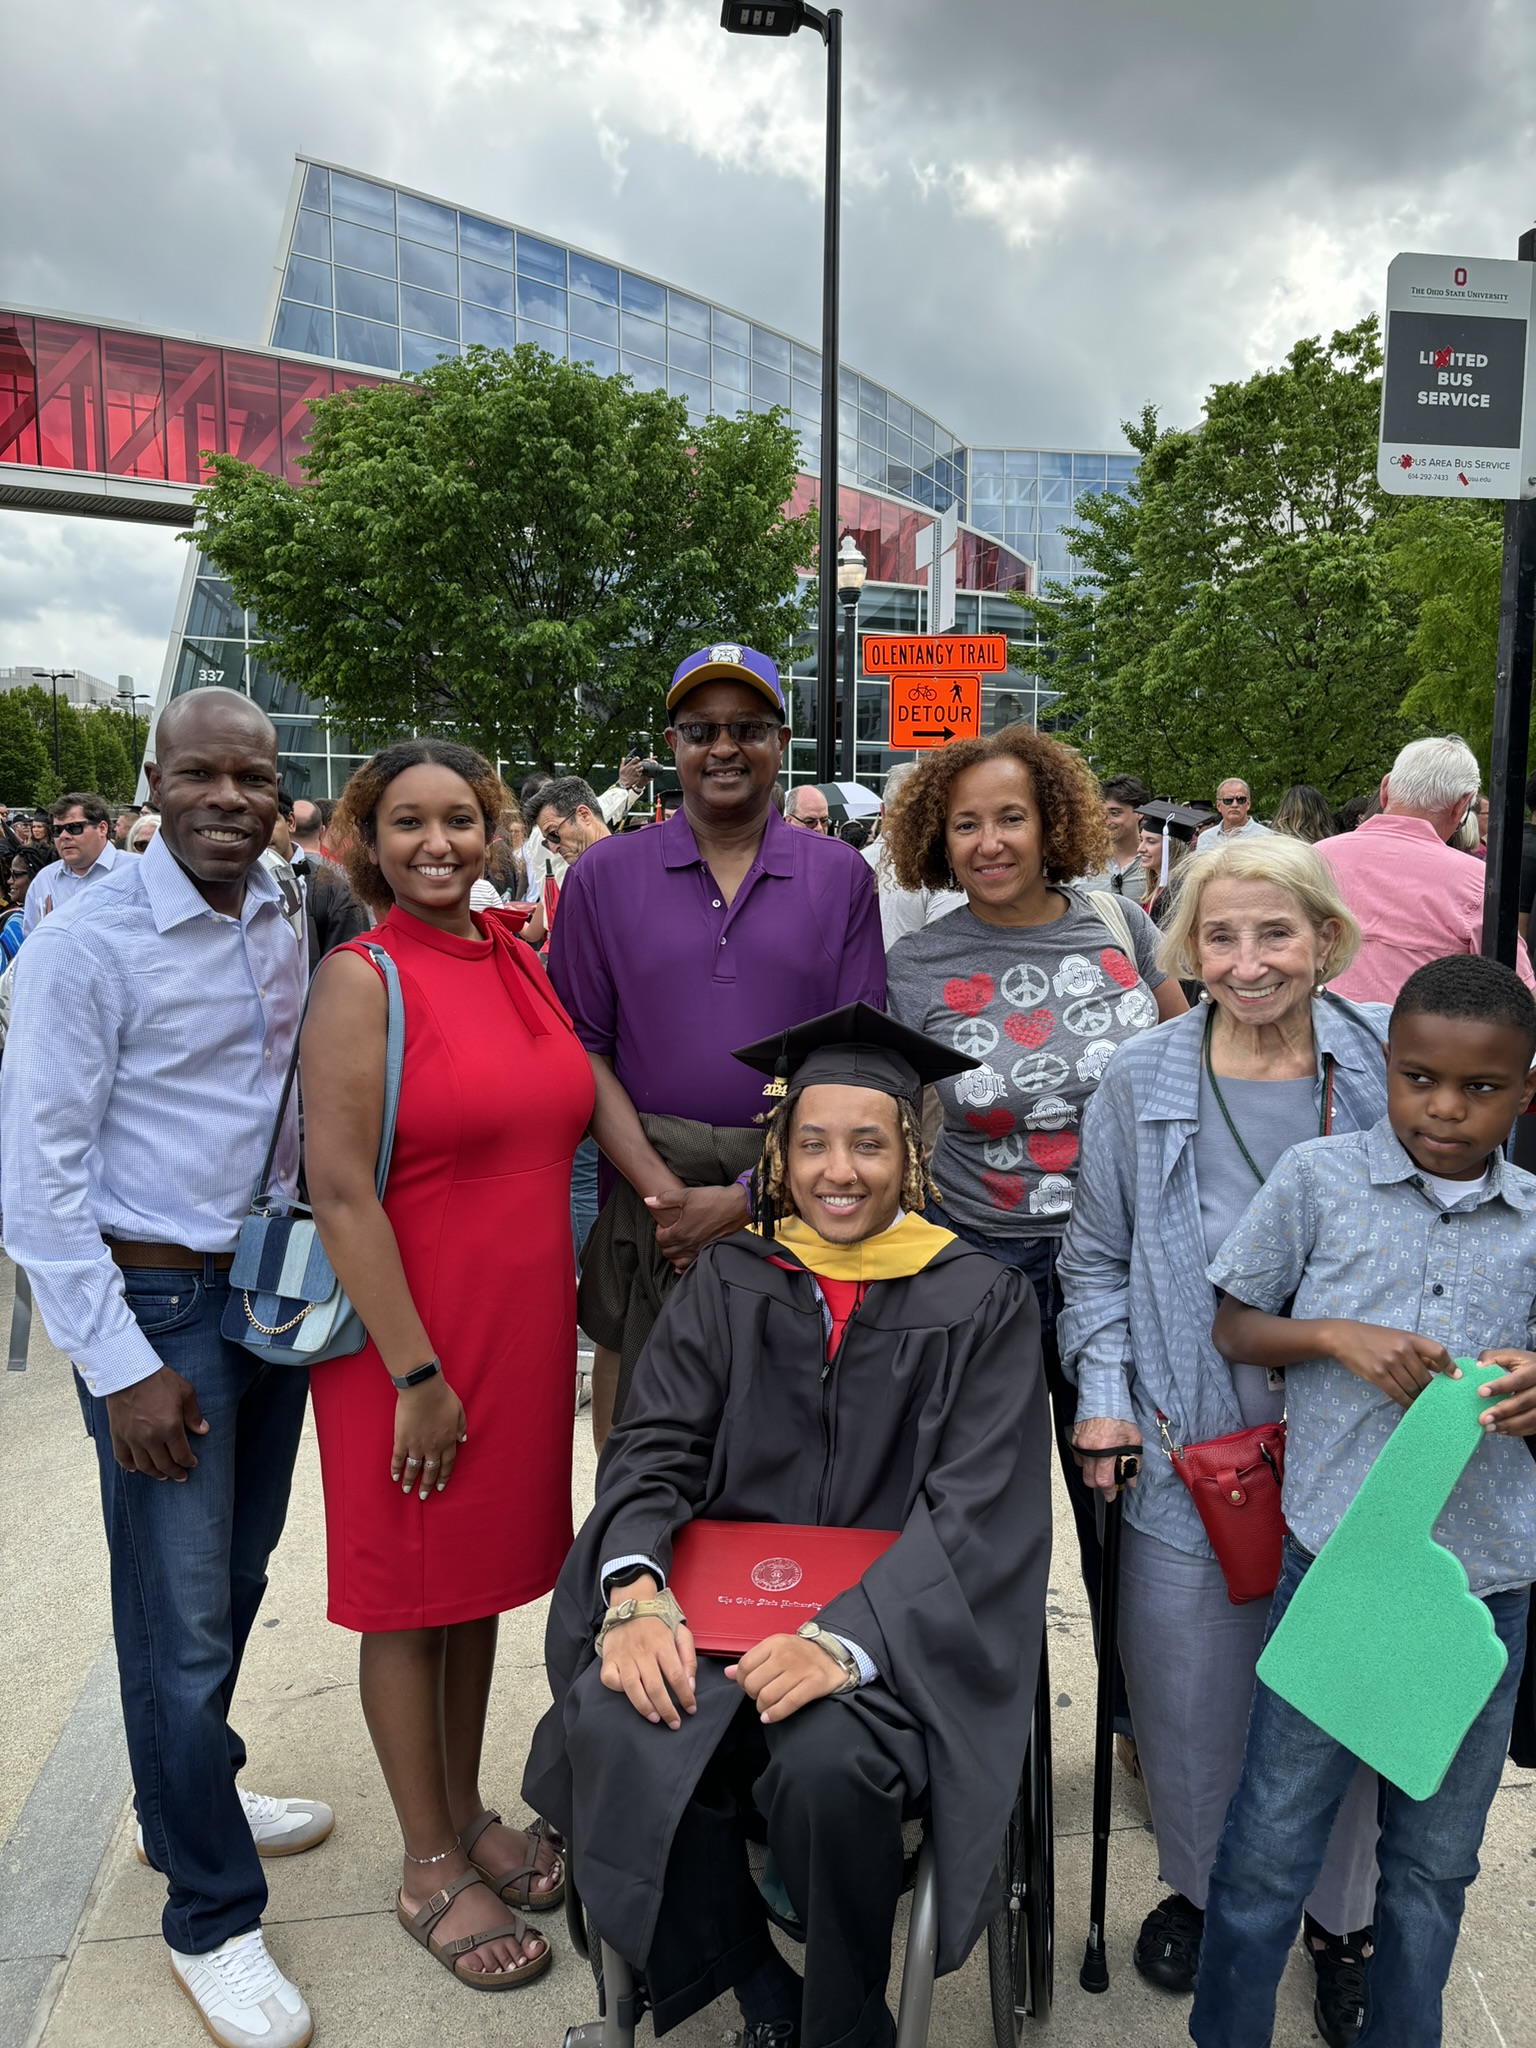 Justin Lennon, a black man in a wheelchair, wearing graduation robes, surrounded by 6 supporters.